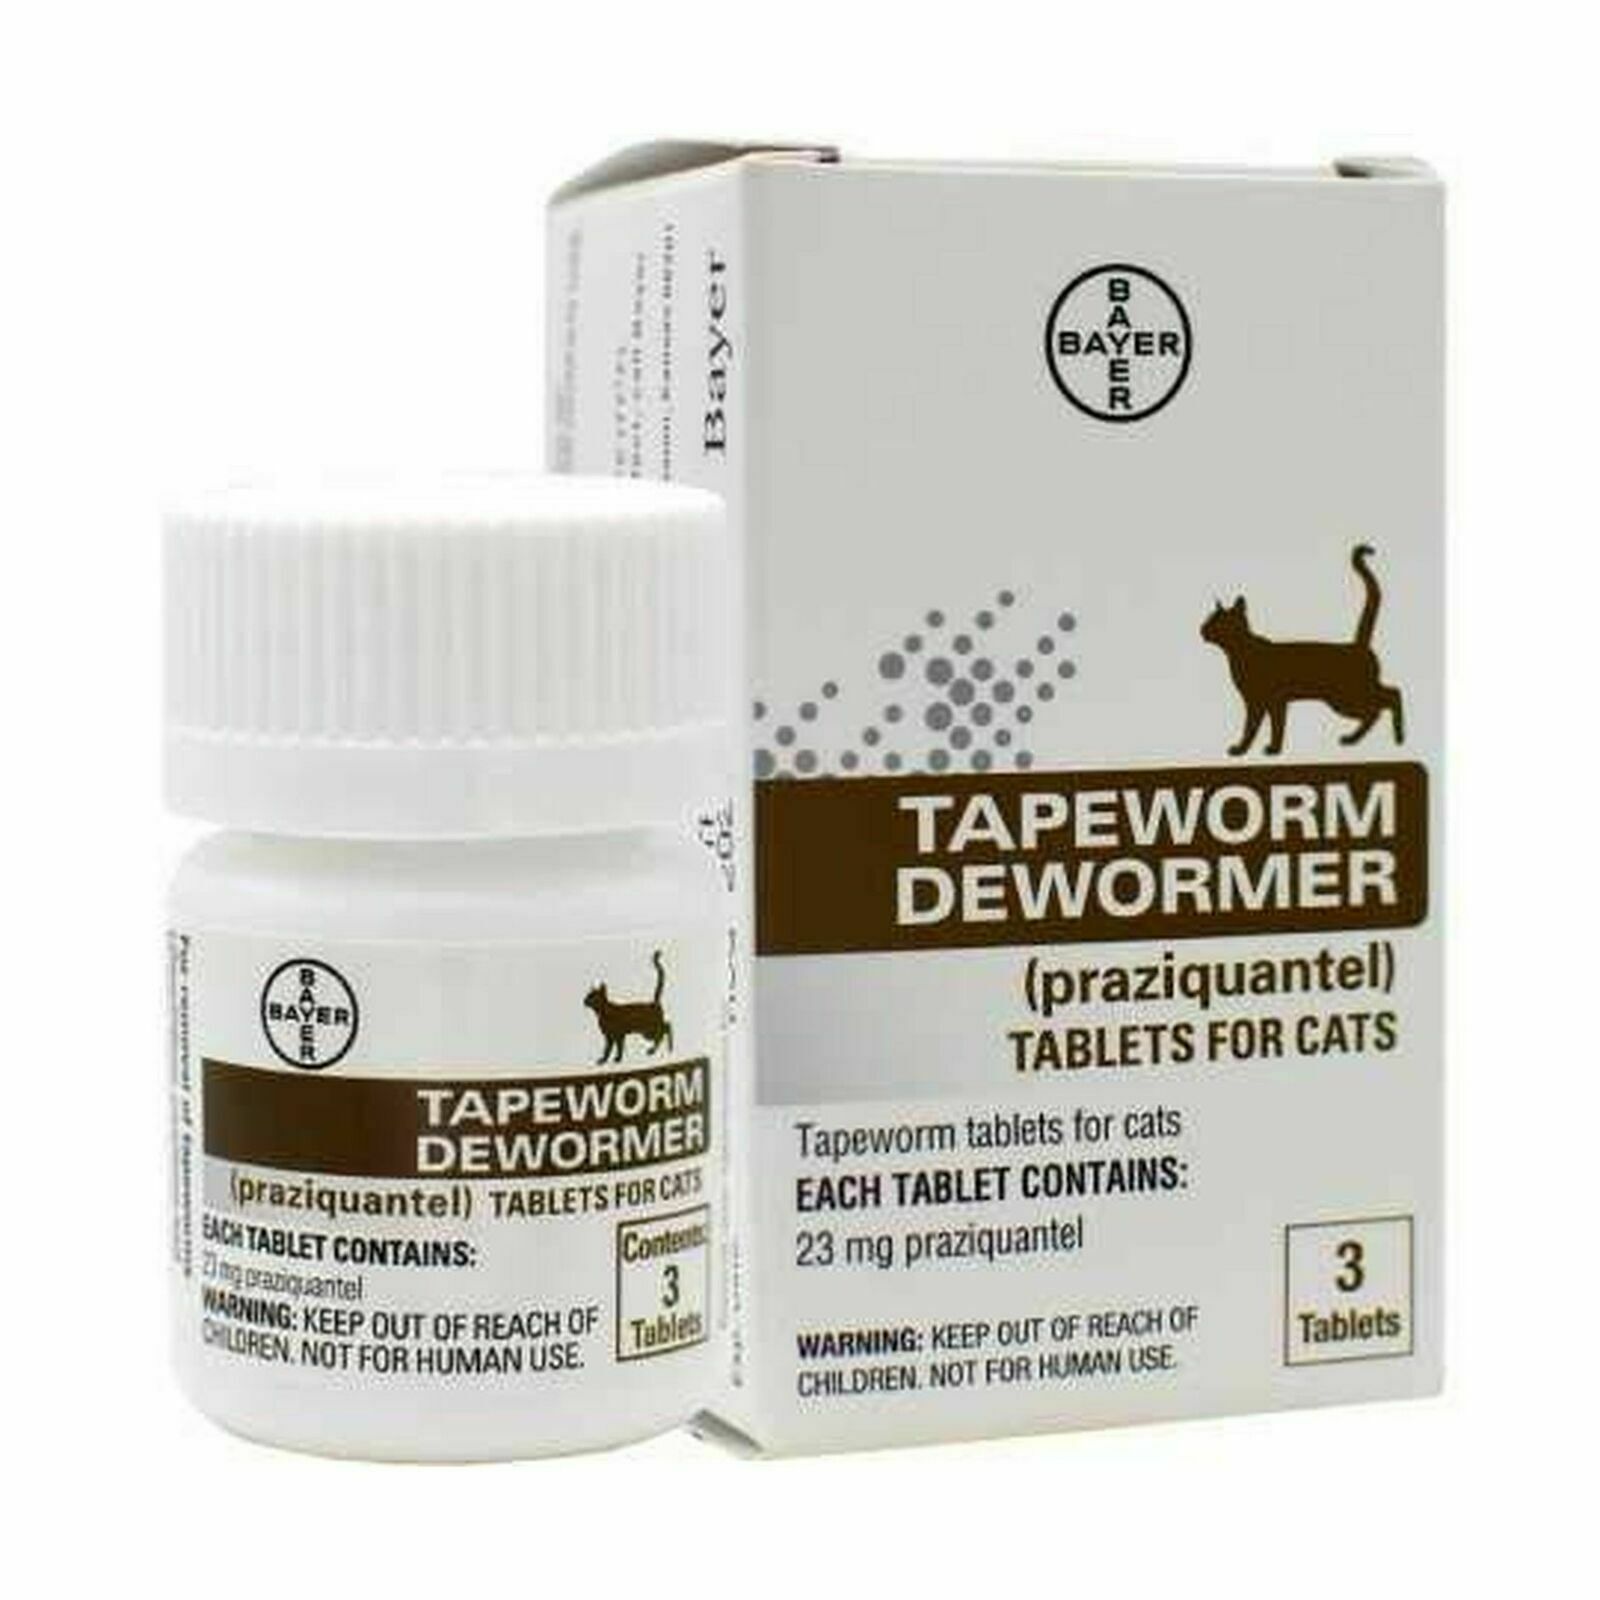 Bayer Tapeworm Dewormer Cats (praziquantel Tablets) 3-count, New - Exp 4/2024